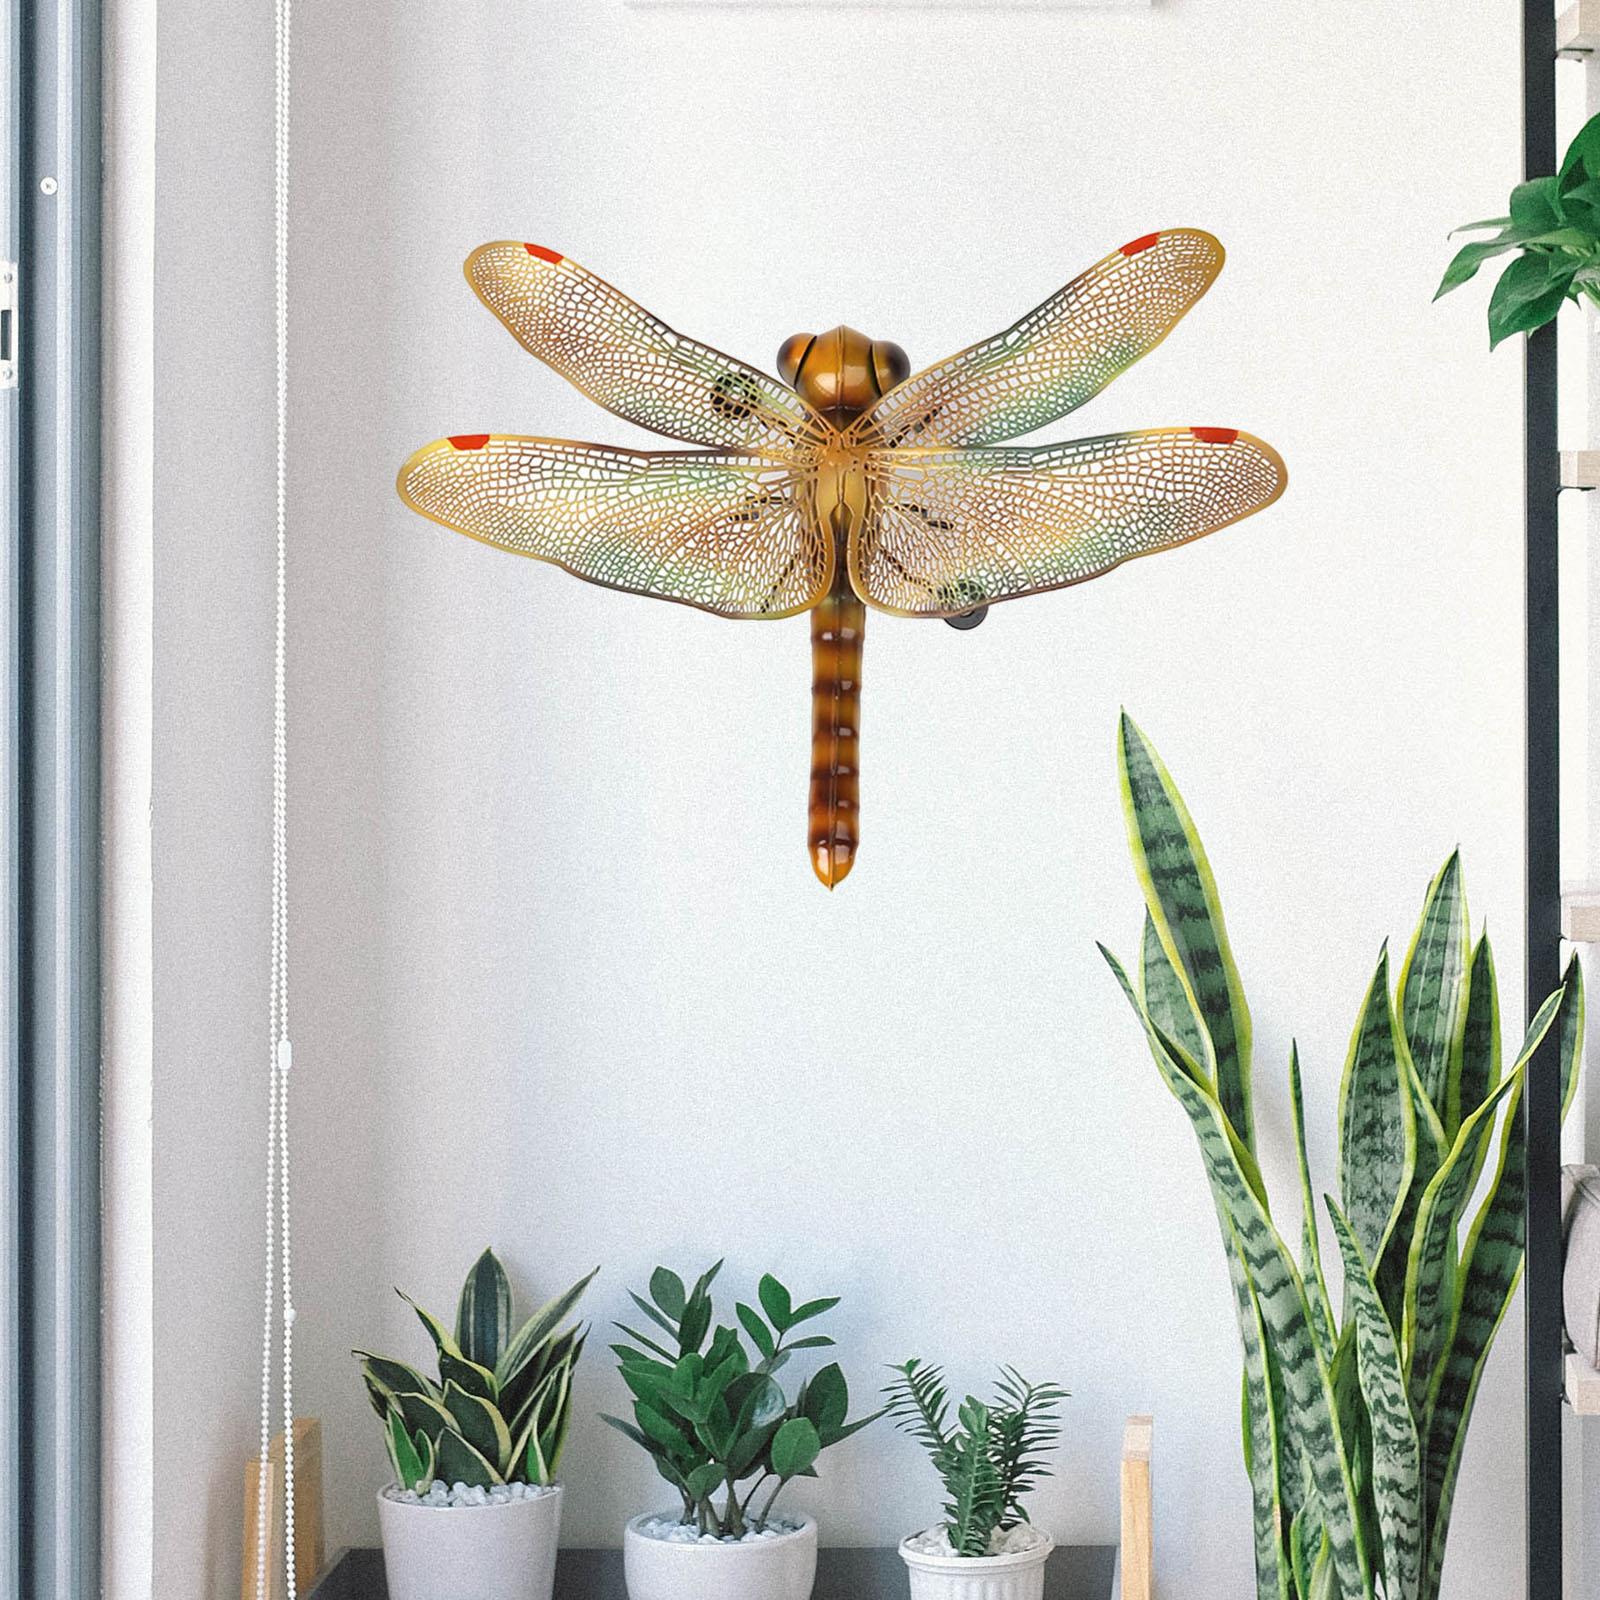 Metal Wall Dragonfly Decorations Art Crafts Decoration for Farmhouse Garden yellow